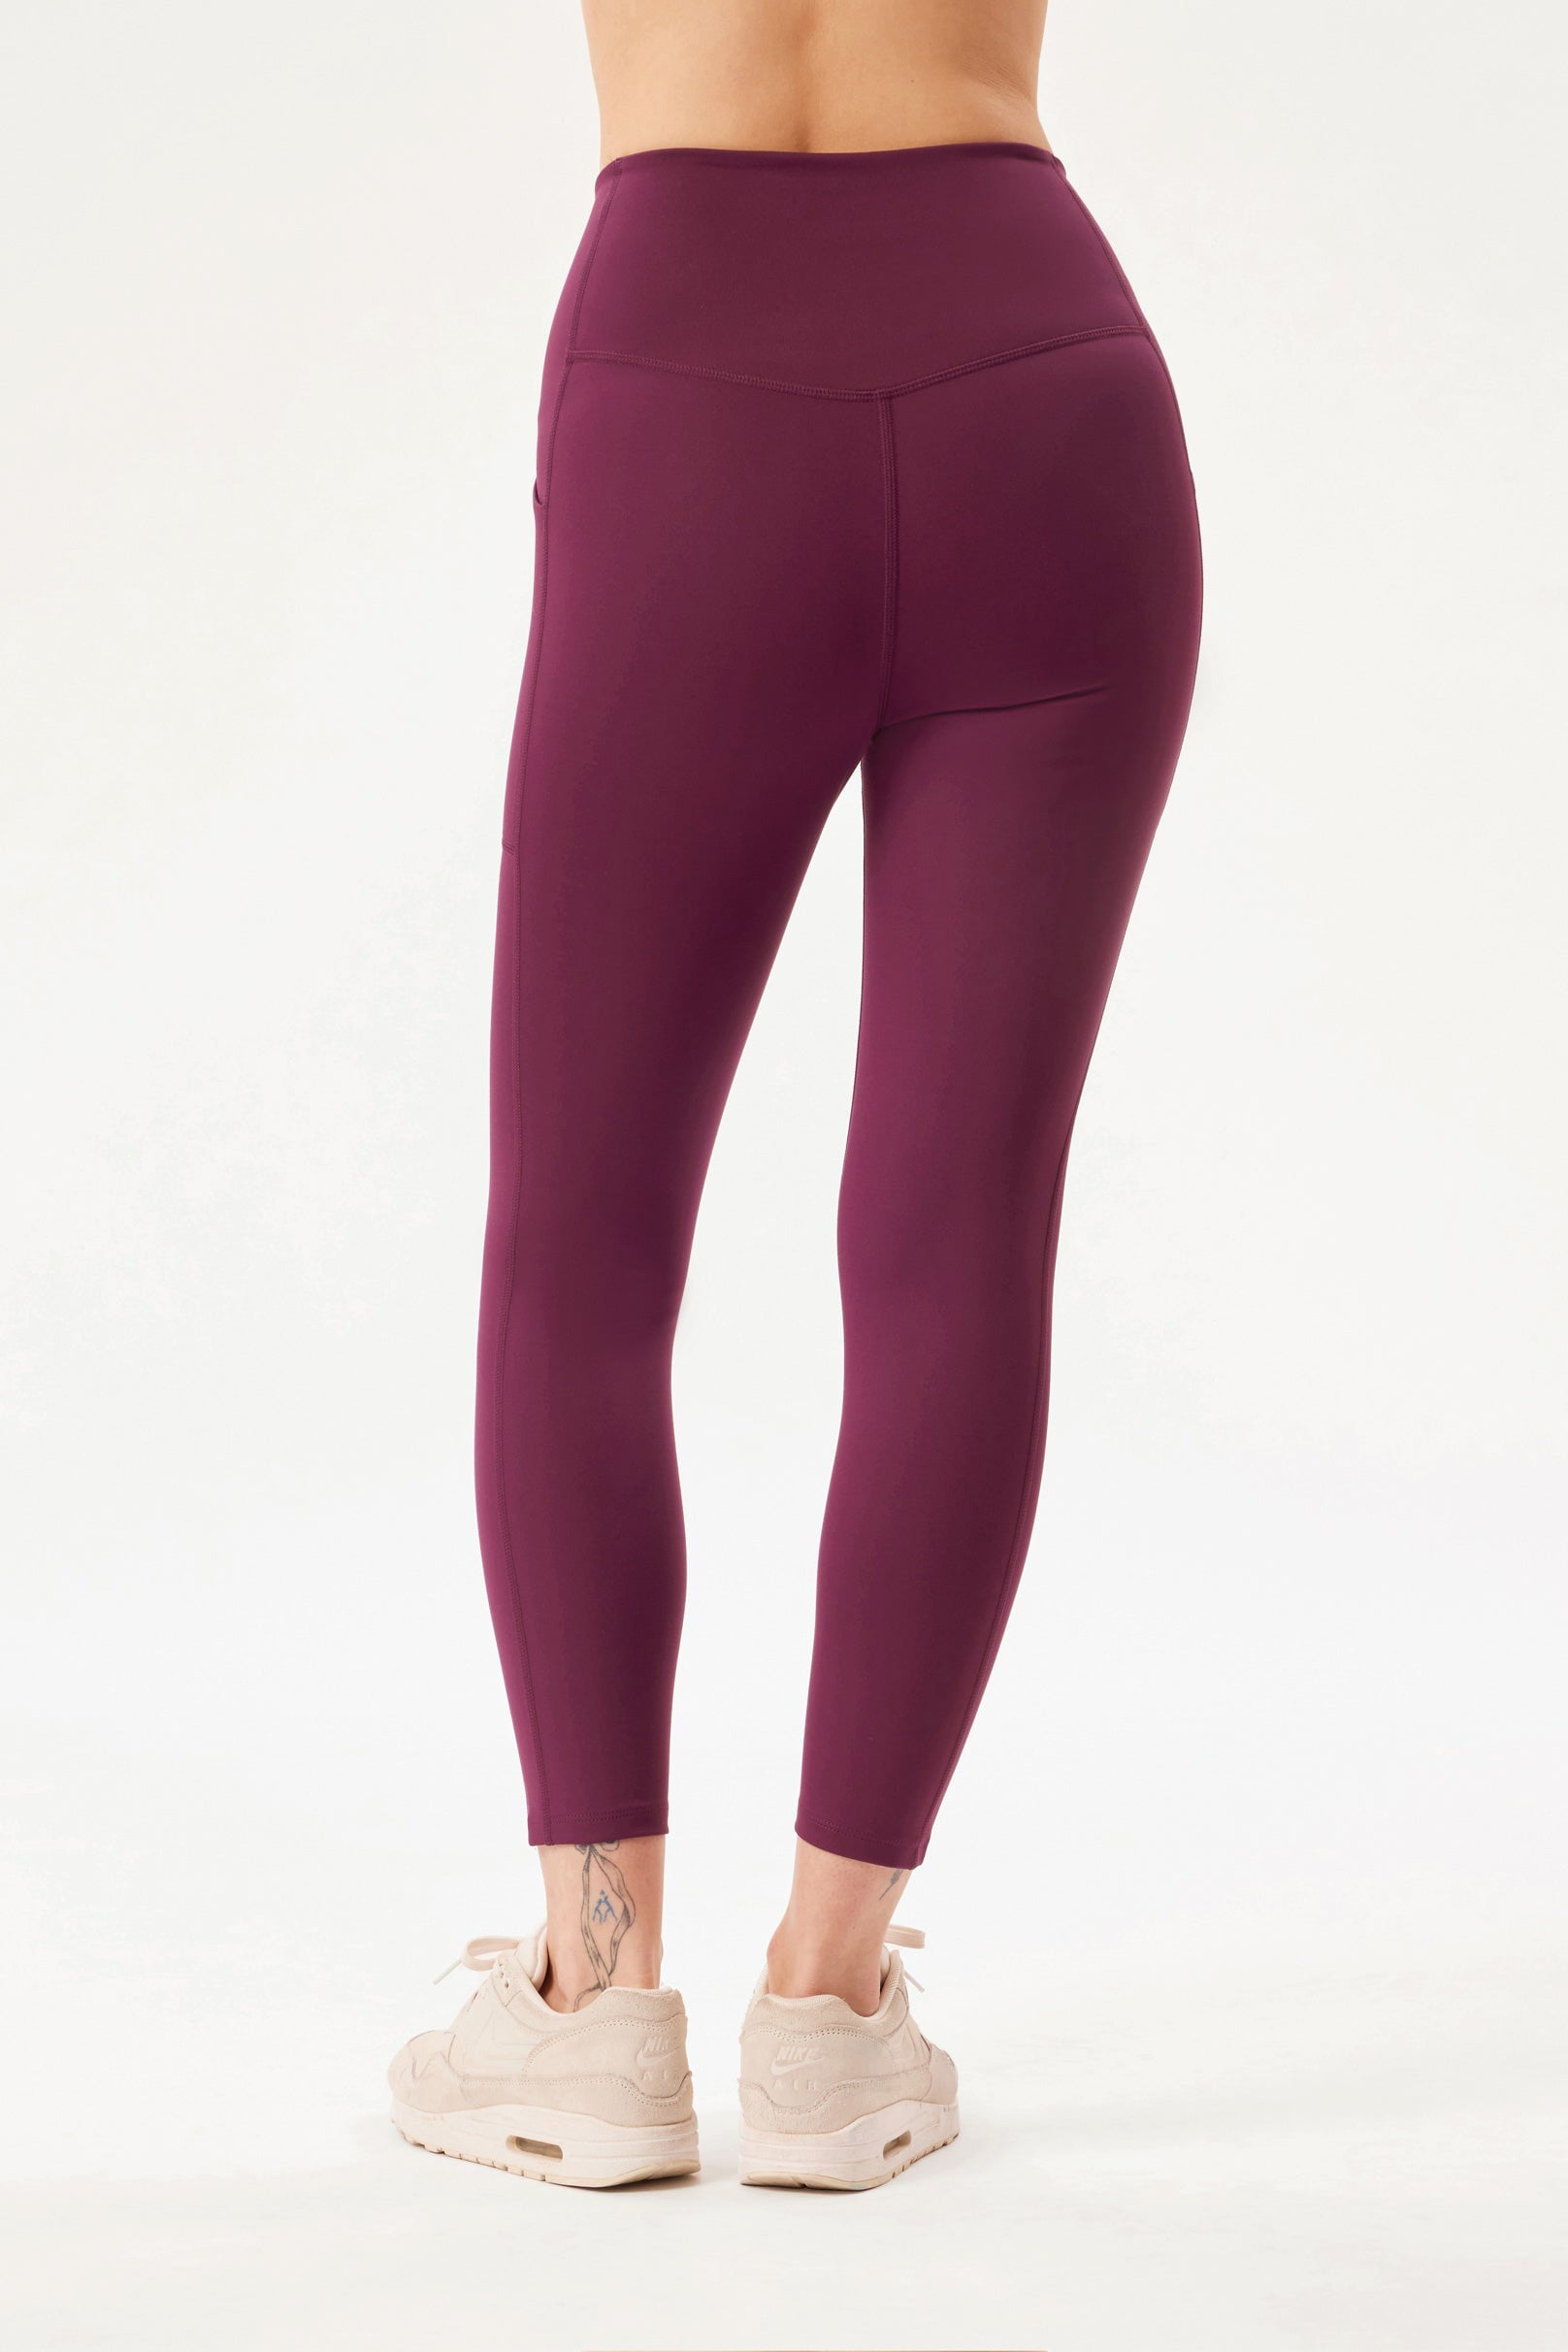 Women's Grape Leaf Go-To Pocket Legging by Pact Apparel